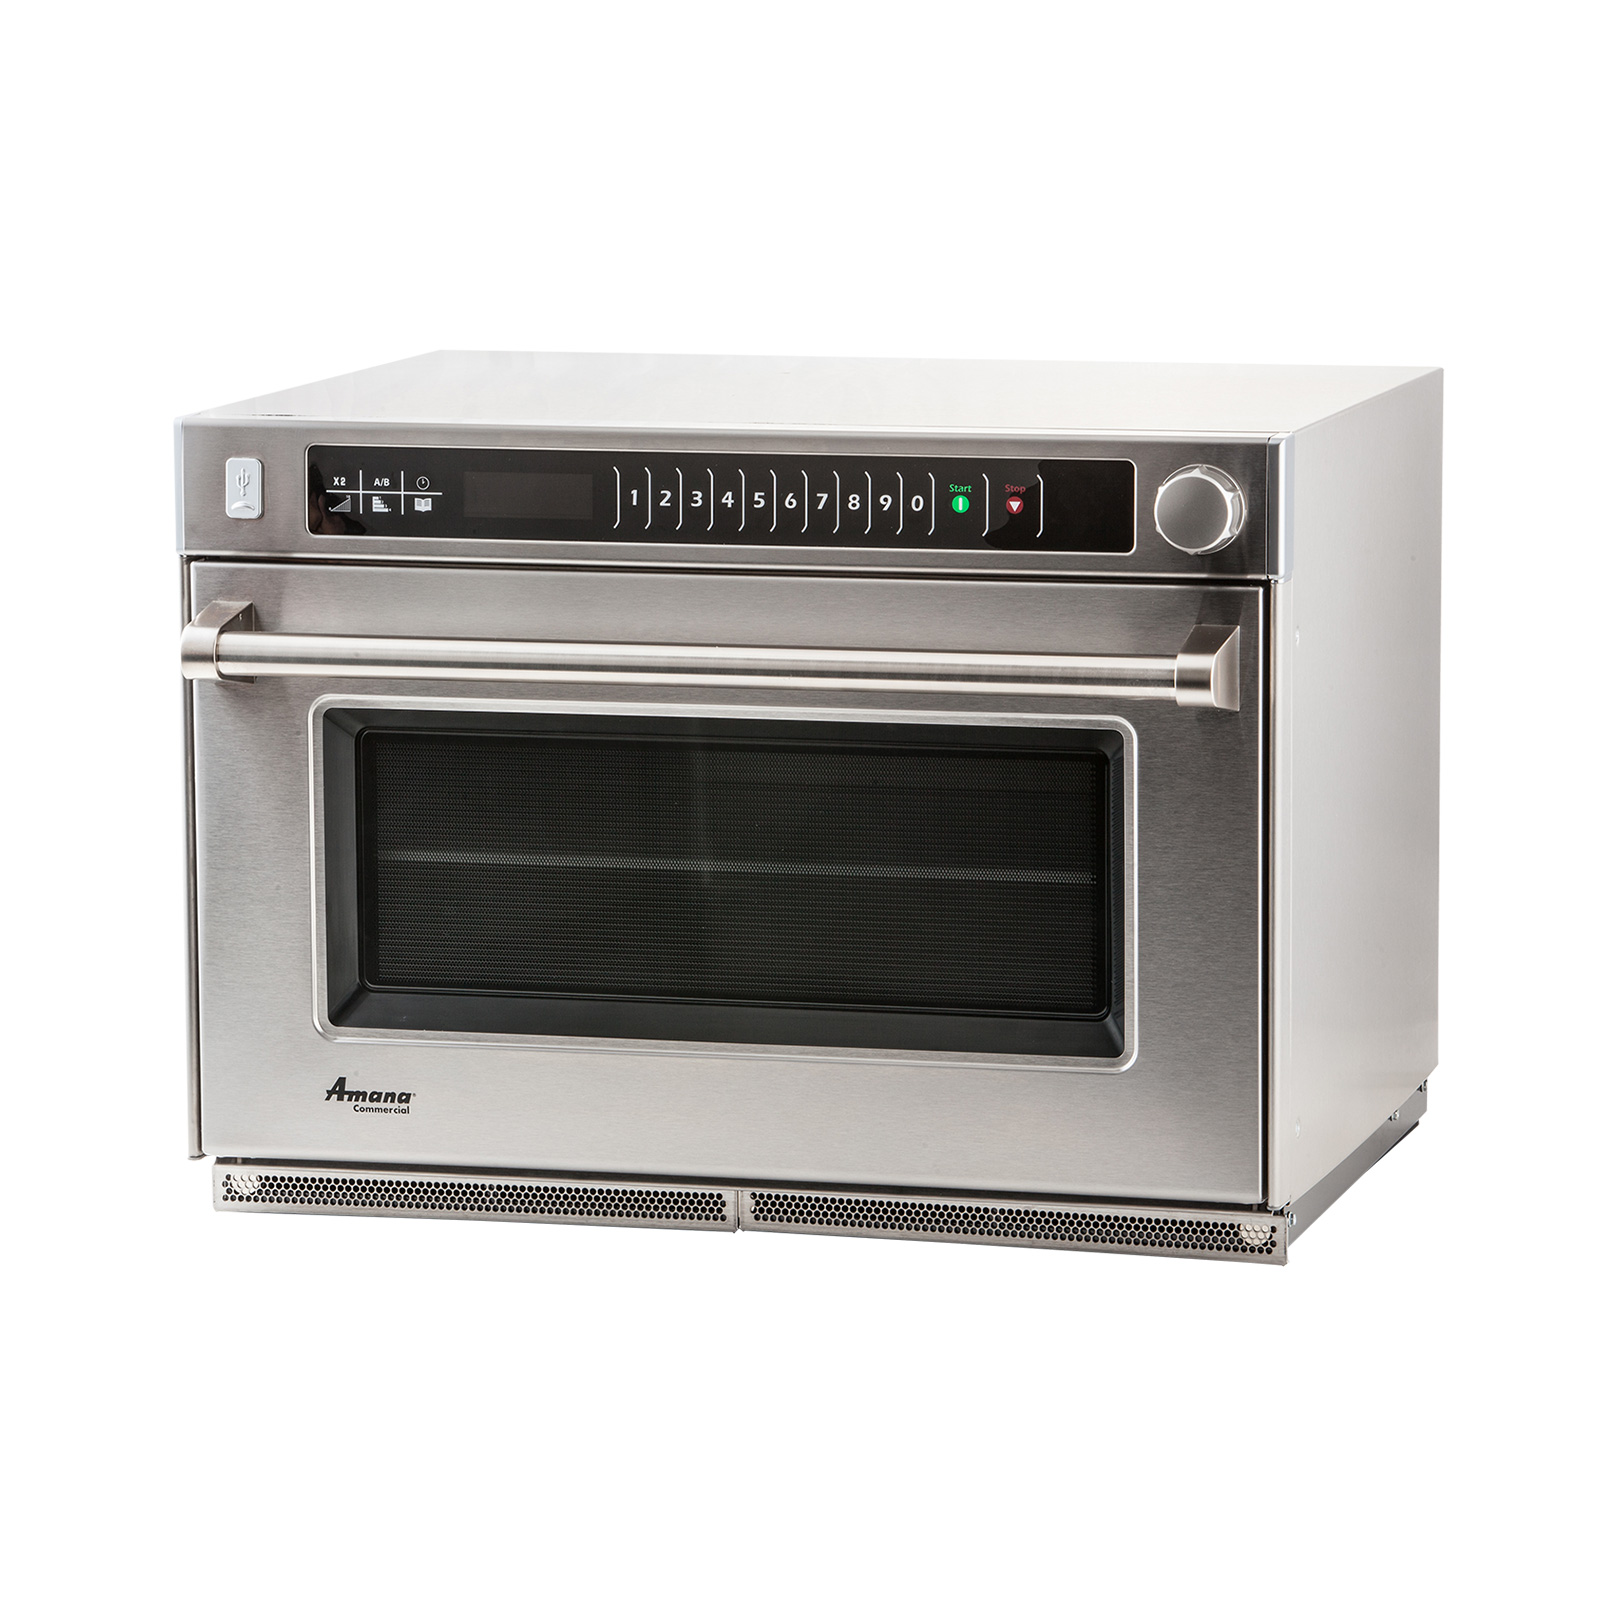 Amana AMSO22 Microwave Oven